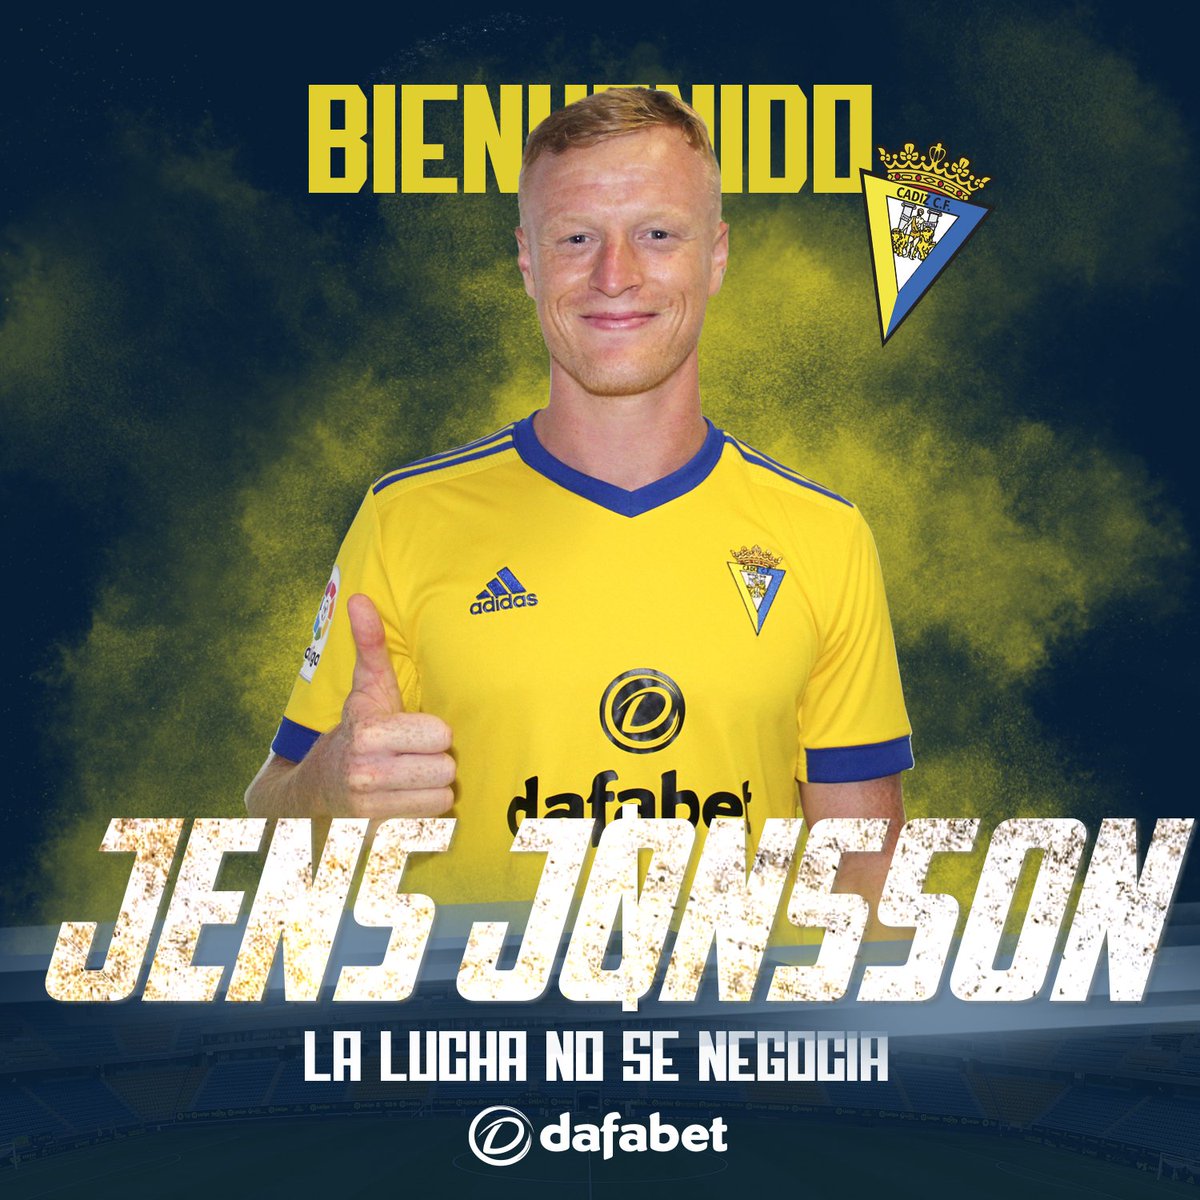  DONE DEAL  - August 25JENS JØNSSON(Free agent to Cádiz )Age: 27Country: Denmark  Position: MidfielderFee: FreeContract: Until 2022  #LLL